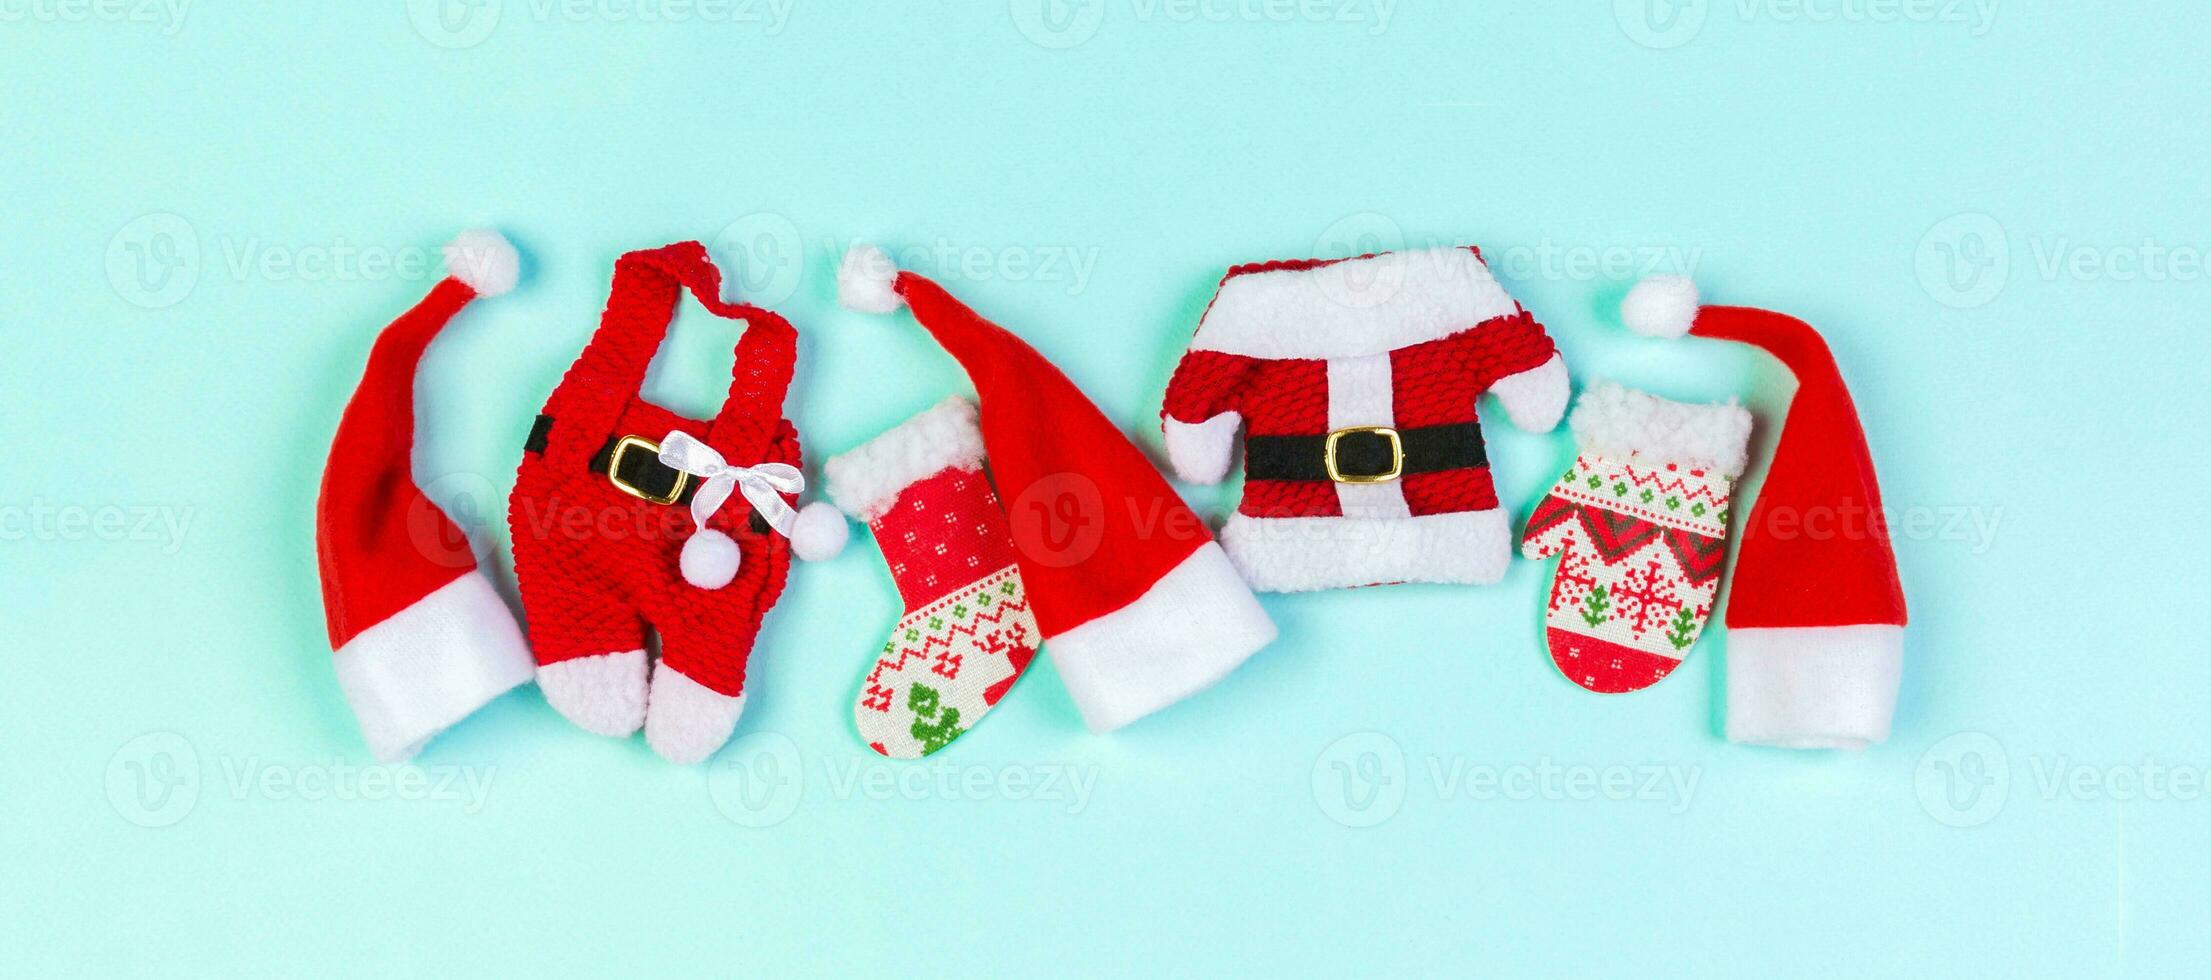 Banner Top view red Santa hats on colorful background. Time for holiday concept with empty space for your design photo